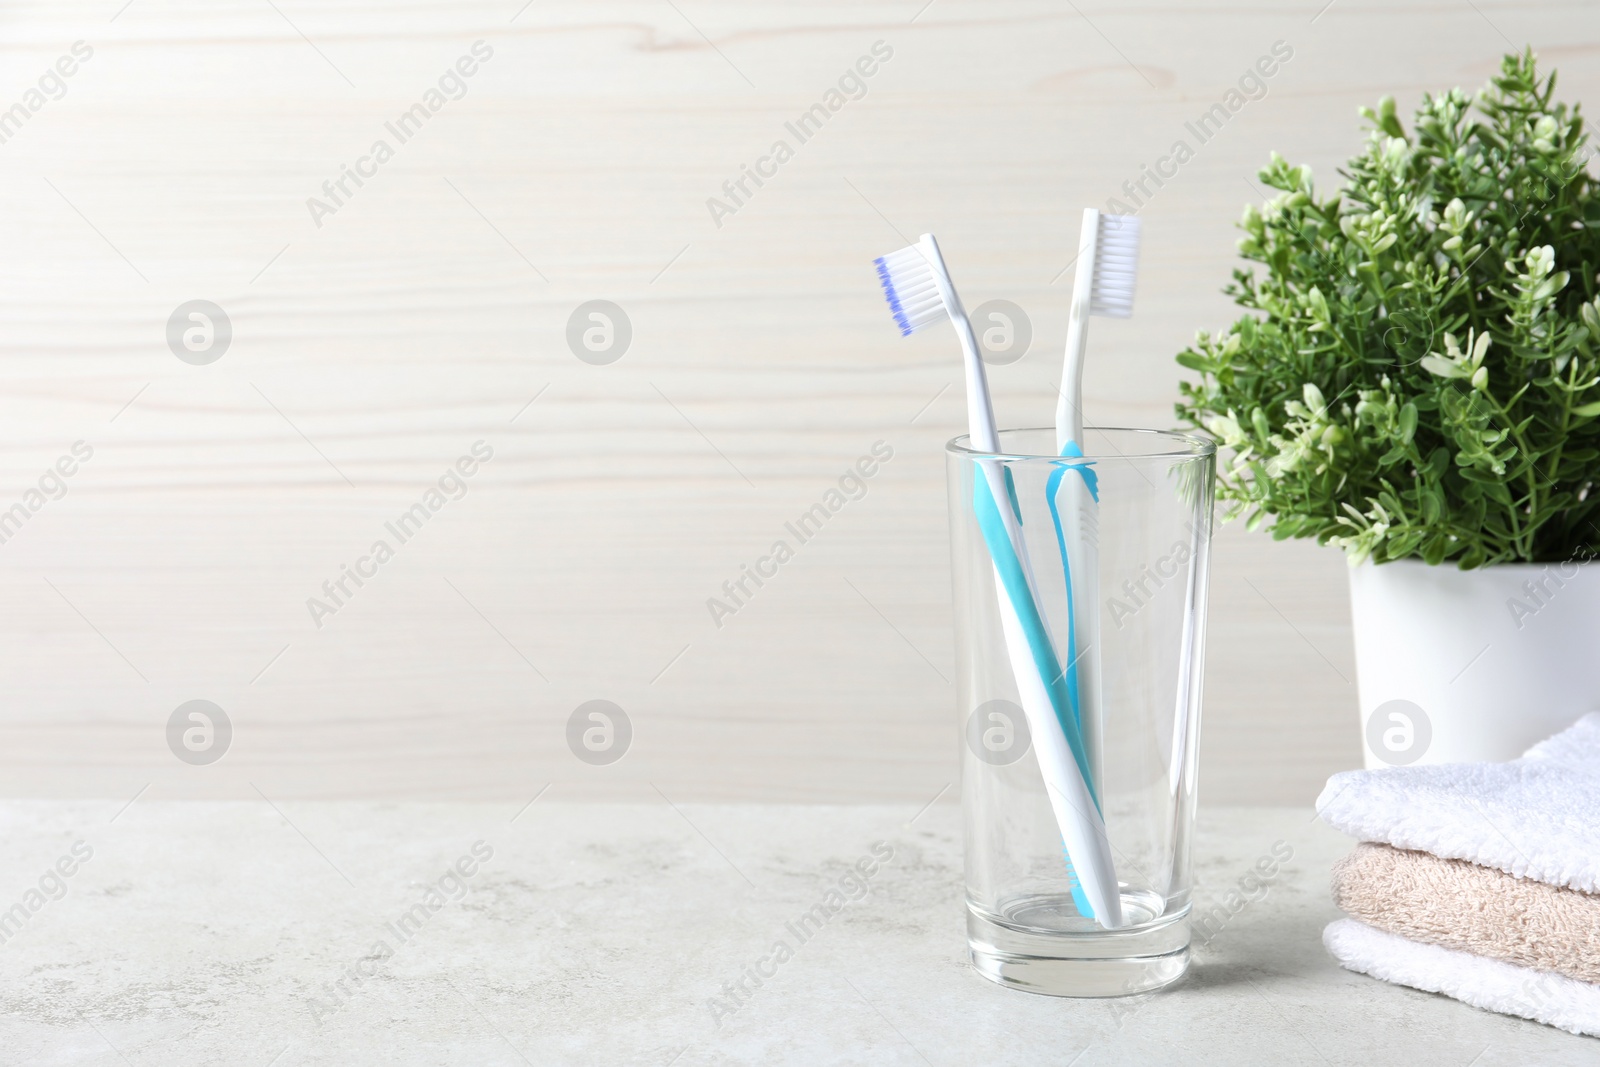 Photo of Plastic toothbrushes in glass holder, towels and plant on light grey table, space for text